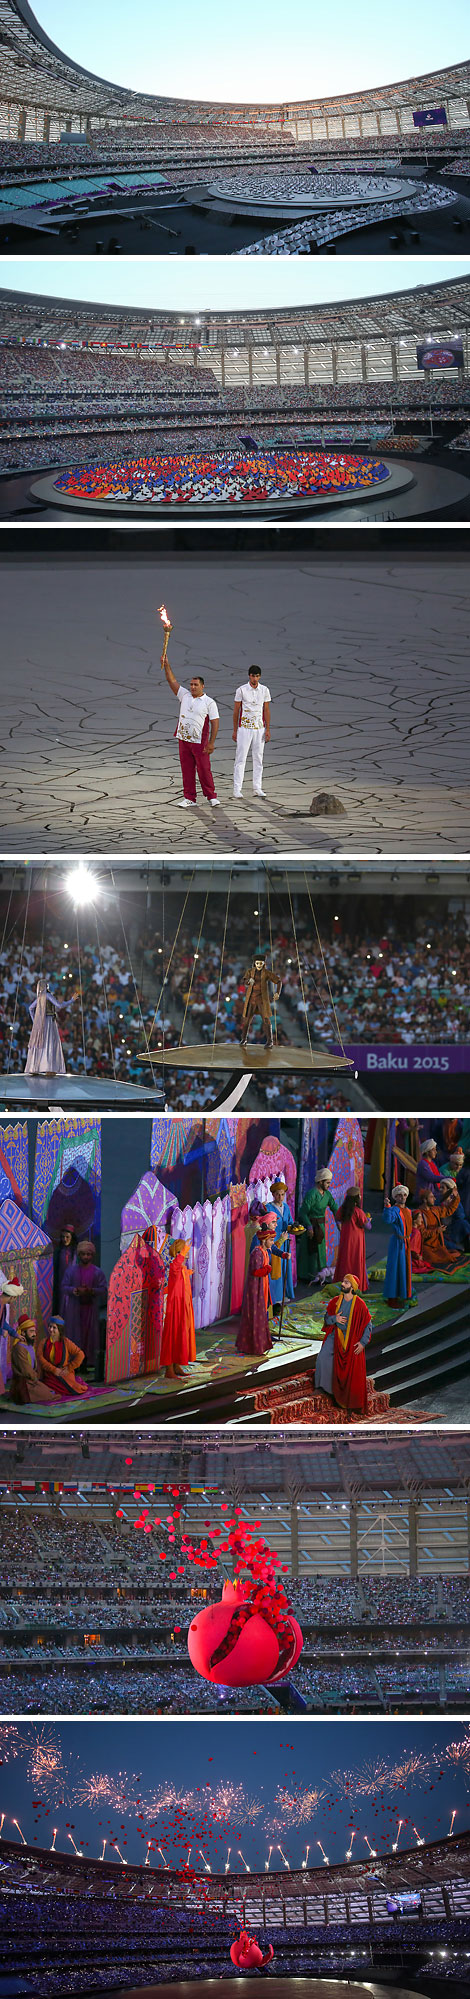 The opening ceremony of the 1st European Games in Baku